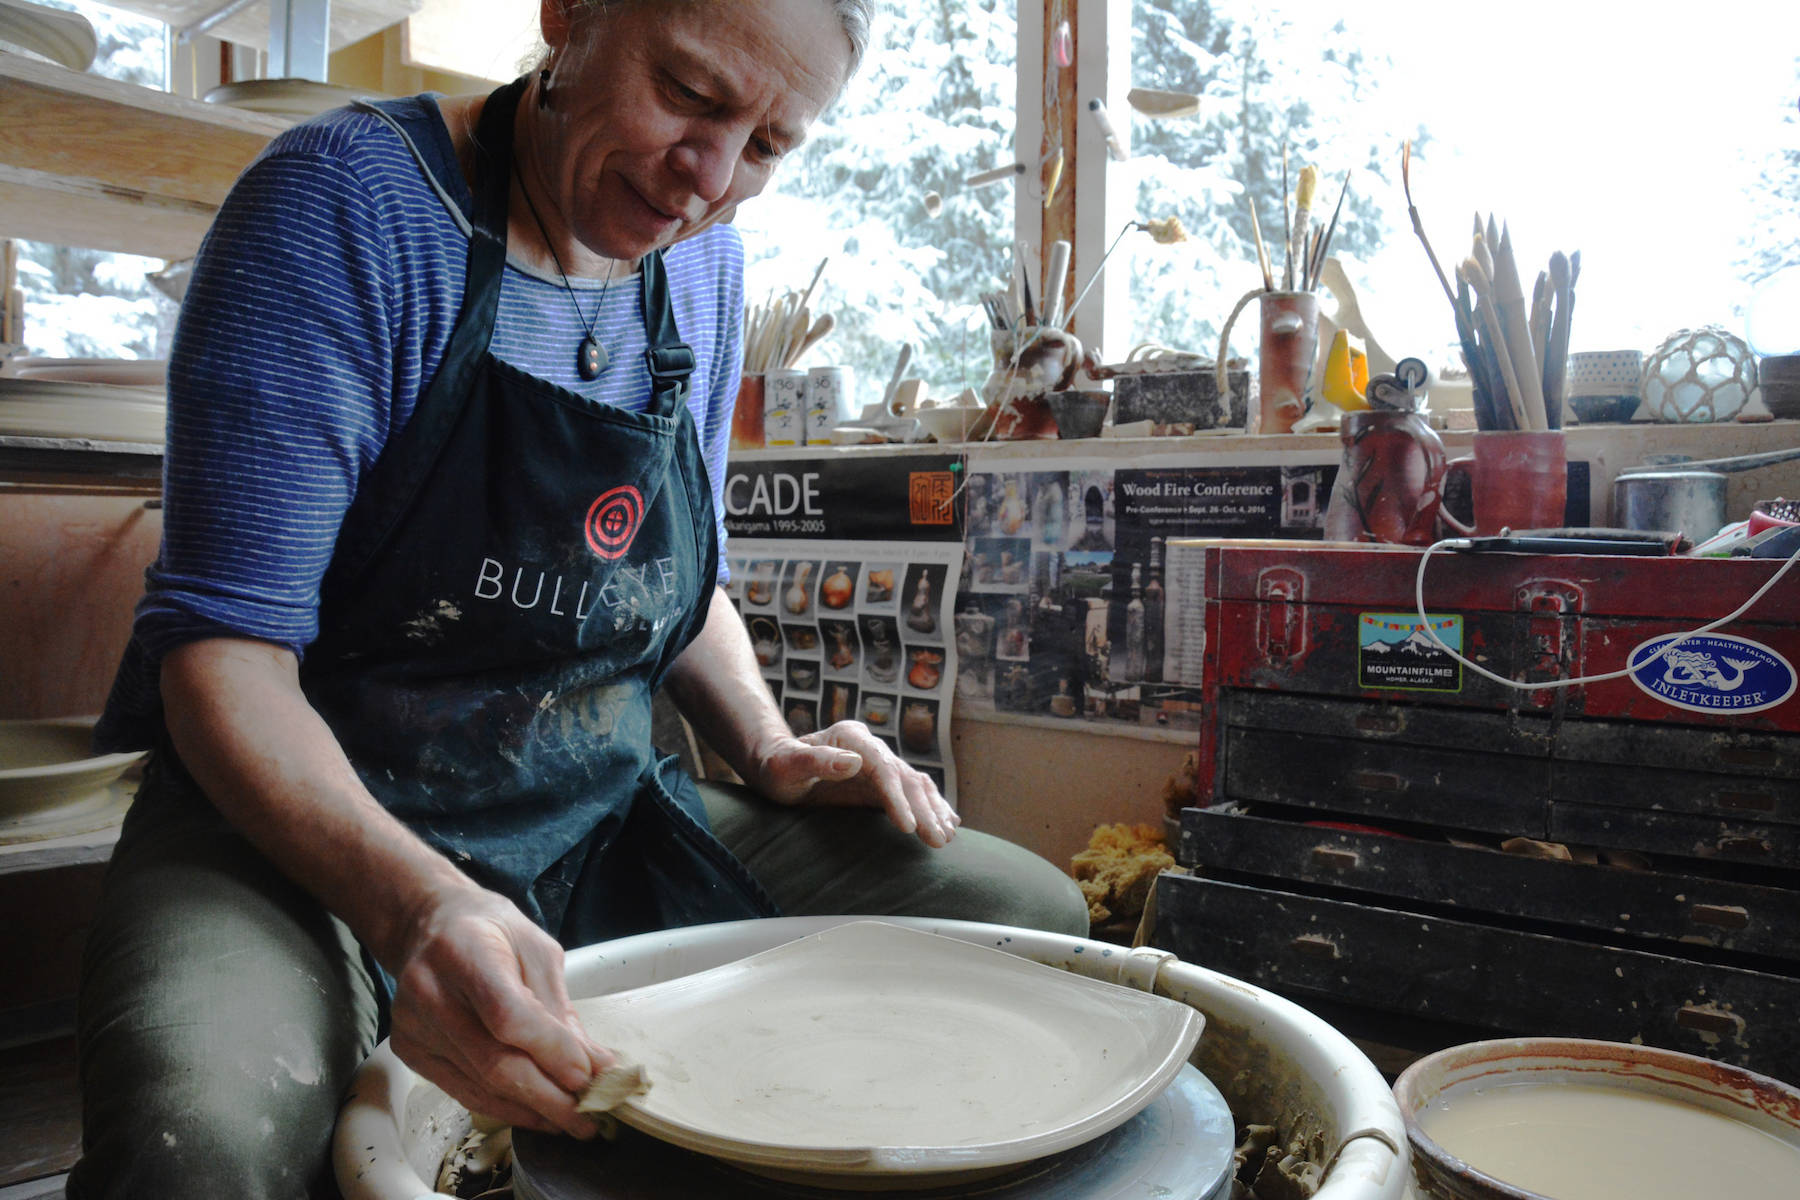 Ceramic artist Lisa Wood makes plates for Bunnell Street Arts Center’s annual Plate Project. (Photo provided)